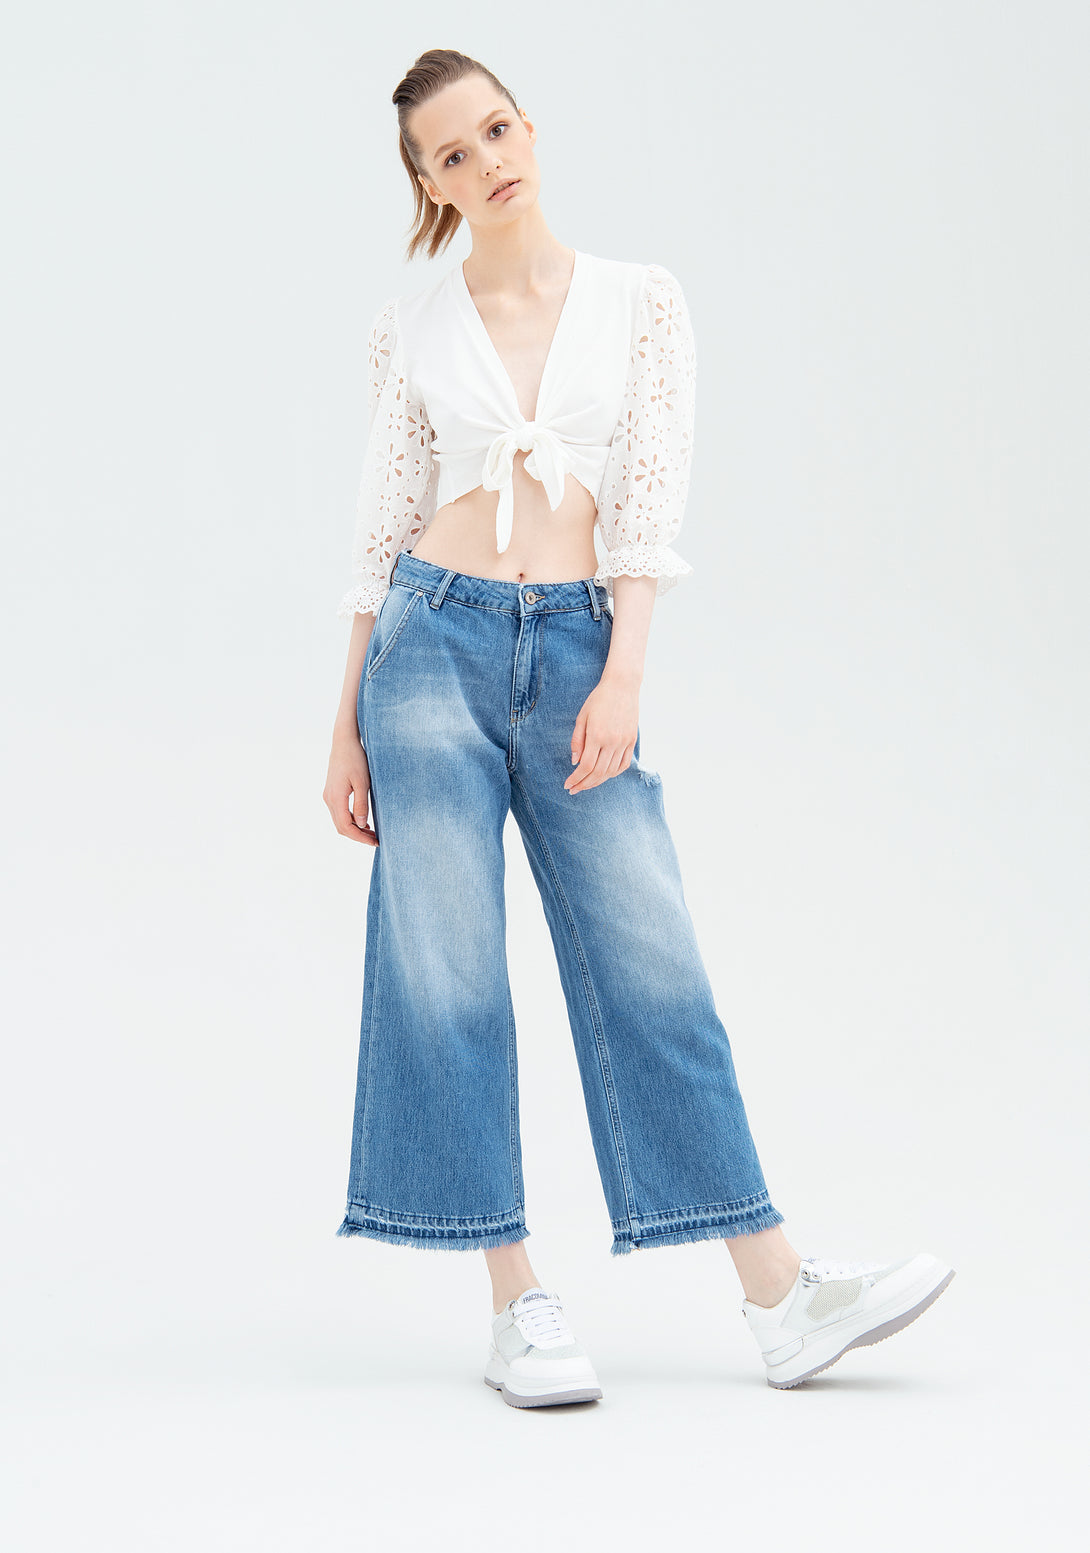 Culotte pant cropped made in denim with middle wash Fracomina FP22SV9004D419N7-883